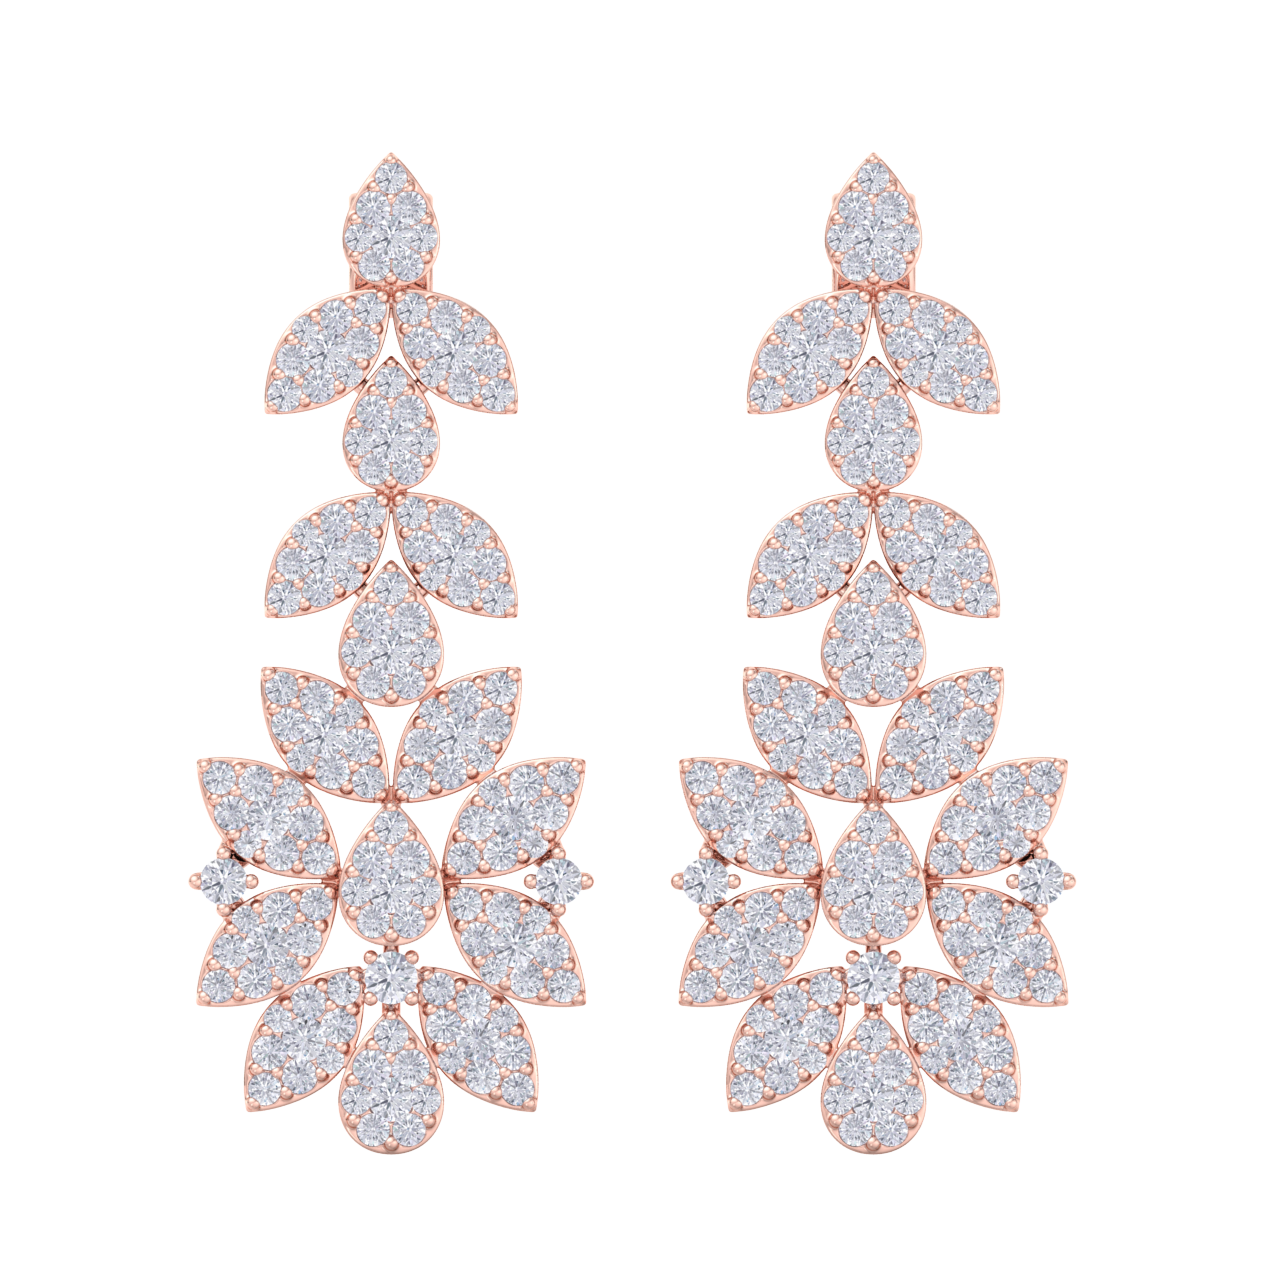 Chandelier earrings in rose gold with white diamonds of 3.03 ct in weight